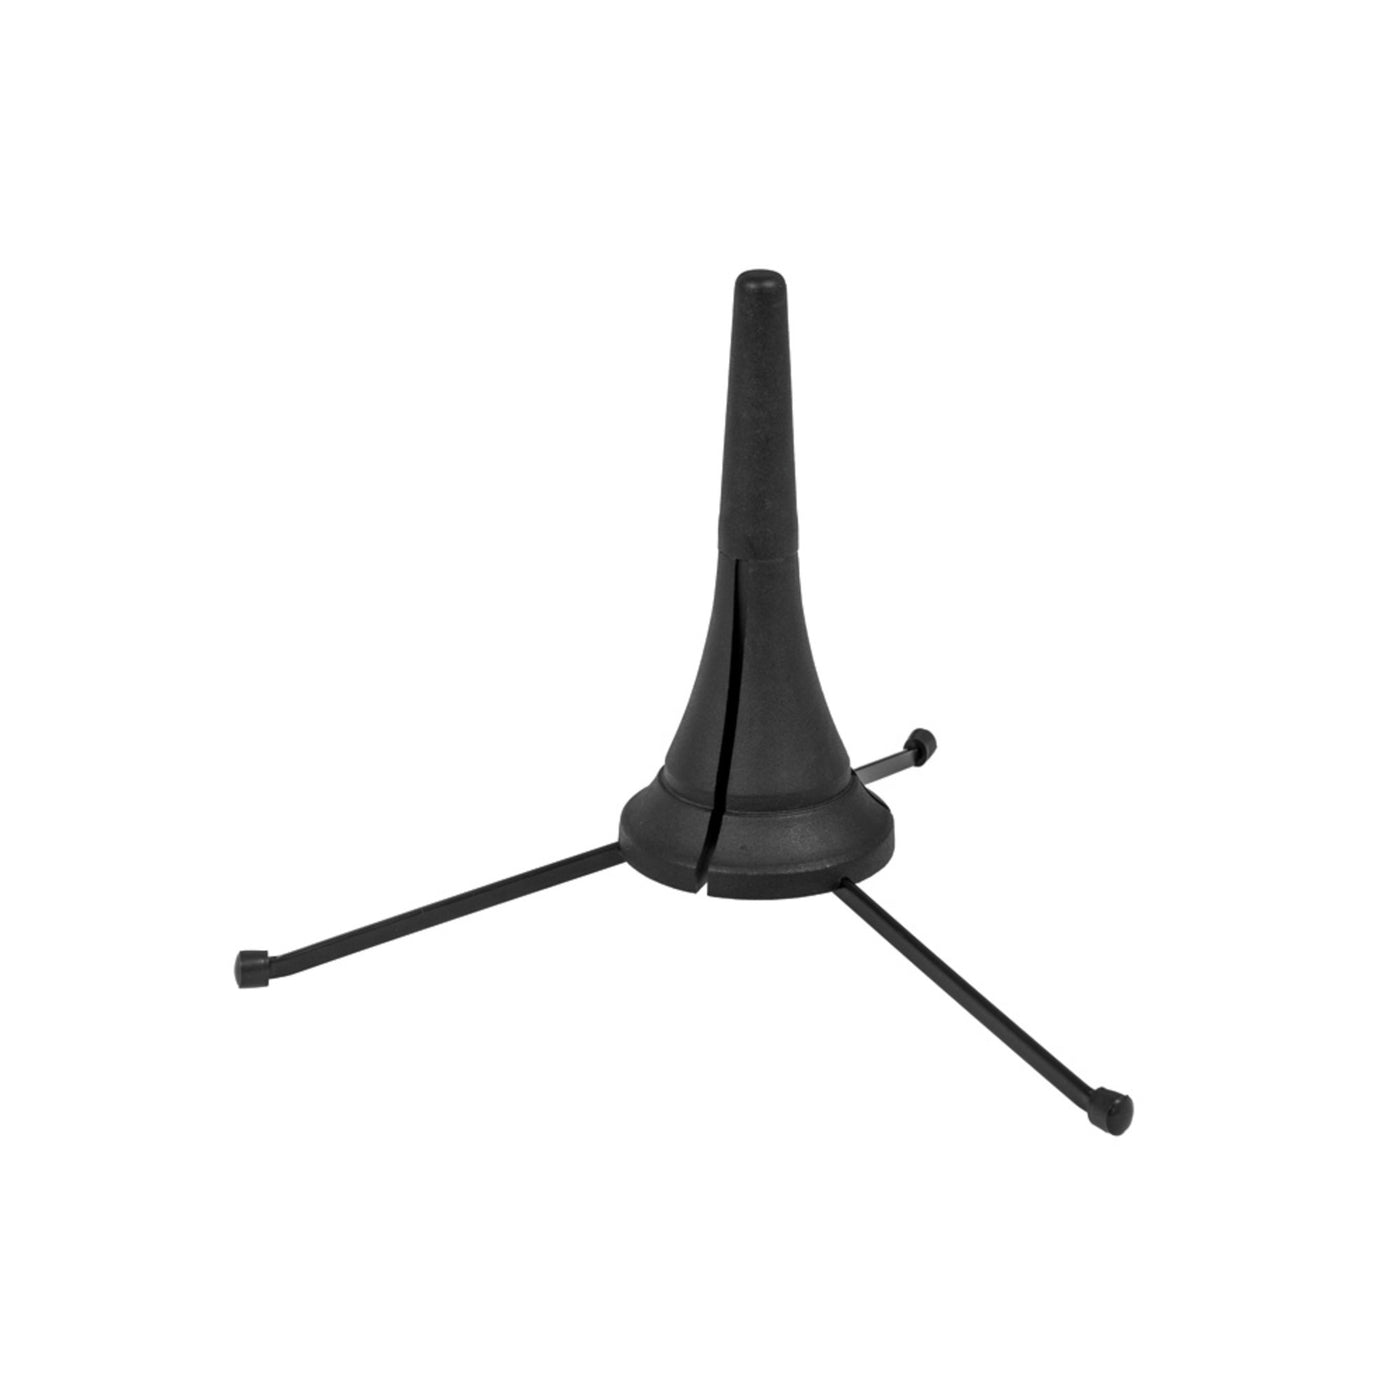 Nomad Compact Clarinet Stand (NIS-C043)